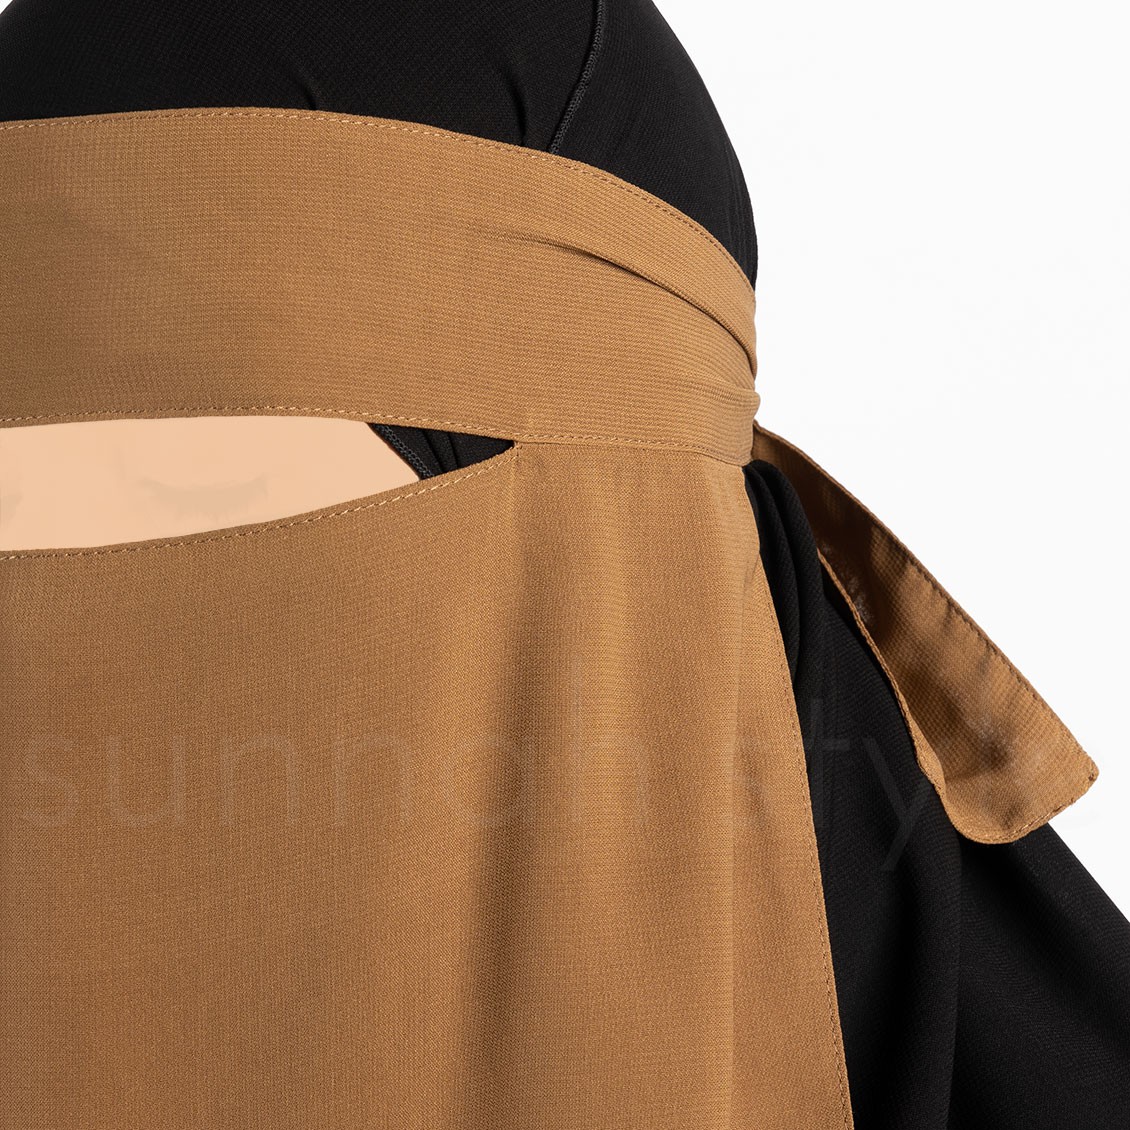 Sunnah Style One Layer One Piece Niqab Caramel